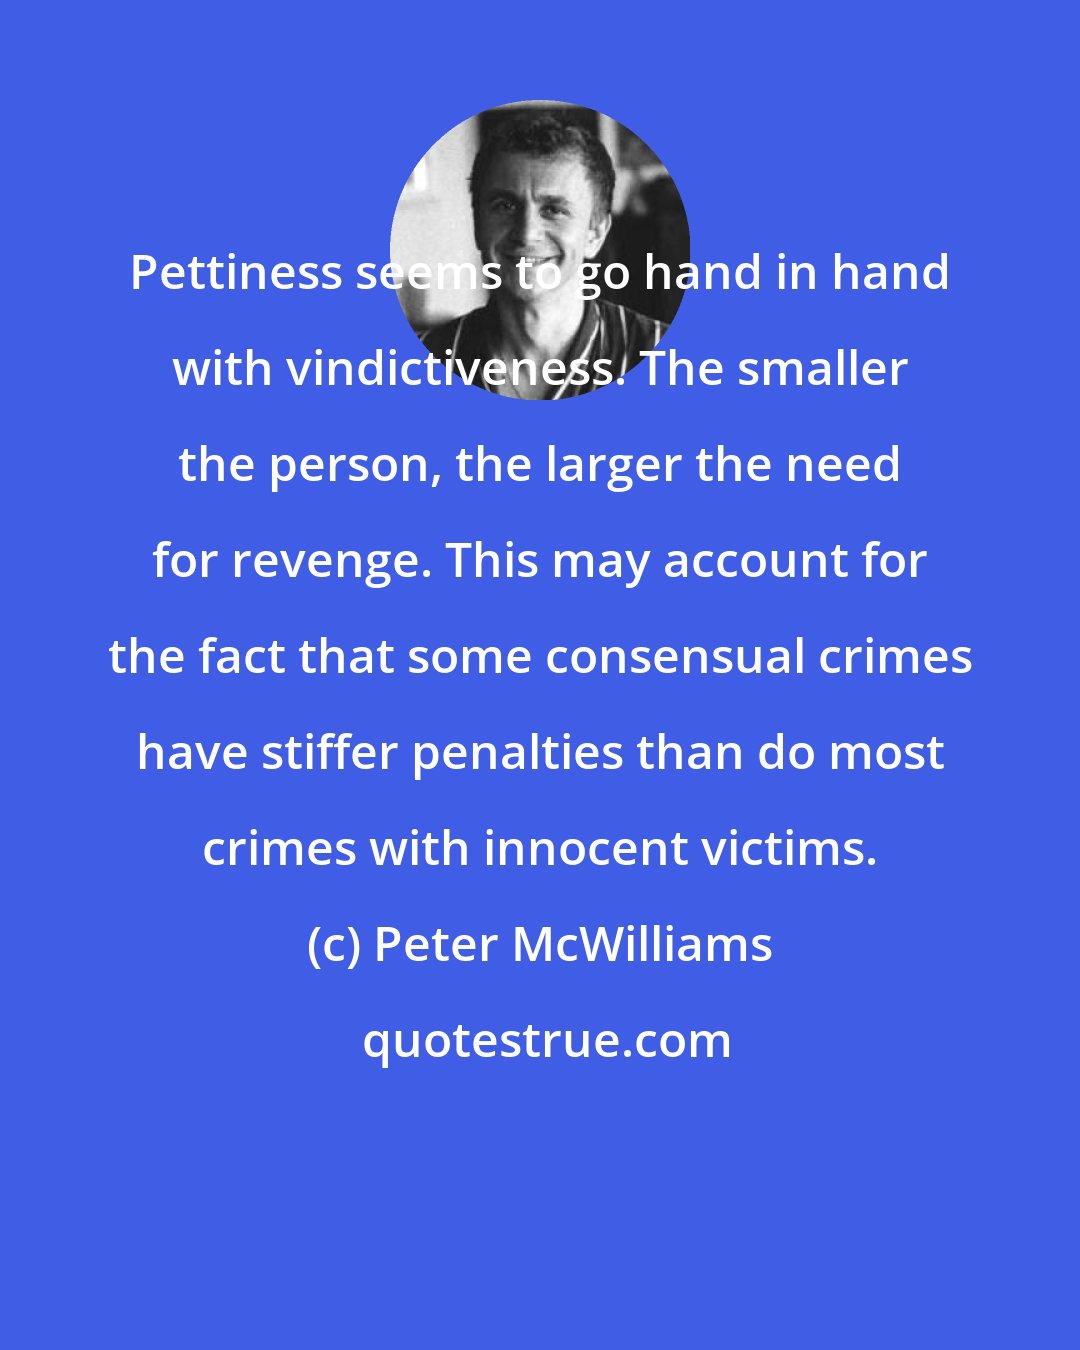 Peter McWilliams: Pettiness seems to go hand in hand with vindictiveness. The smaller the person, the larger the need for revenge. This may account for the fact that some consensual crimes have stiffer penalties than do most crimes with innocent victims.